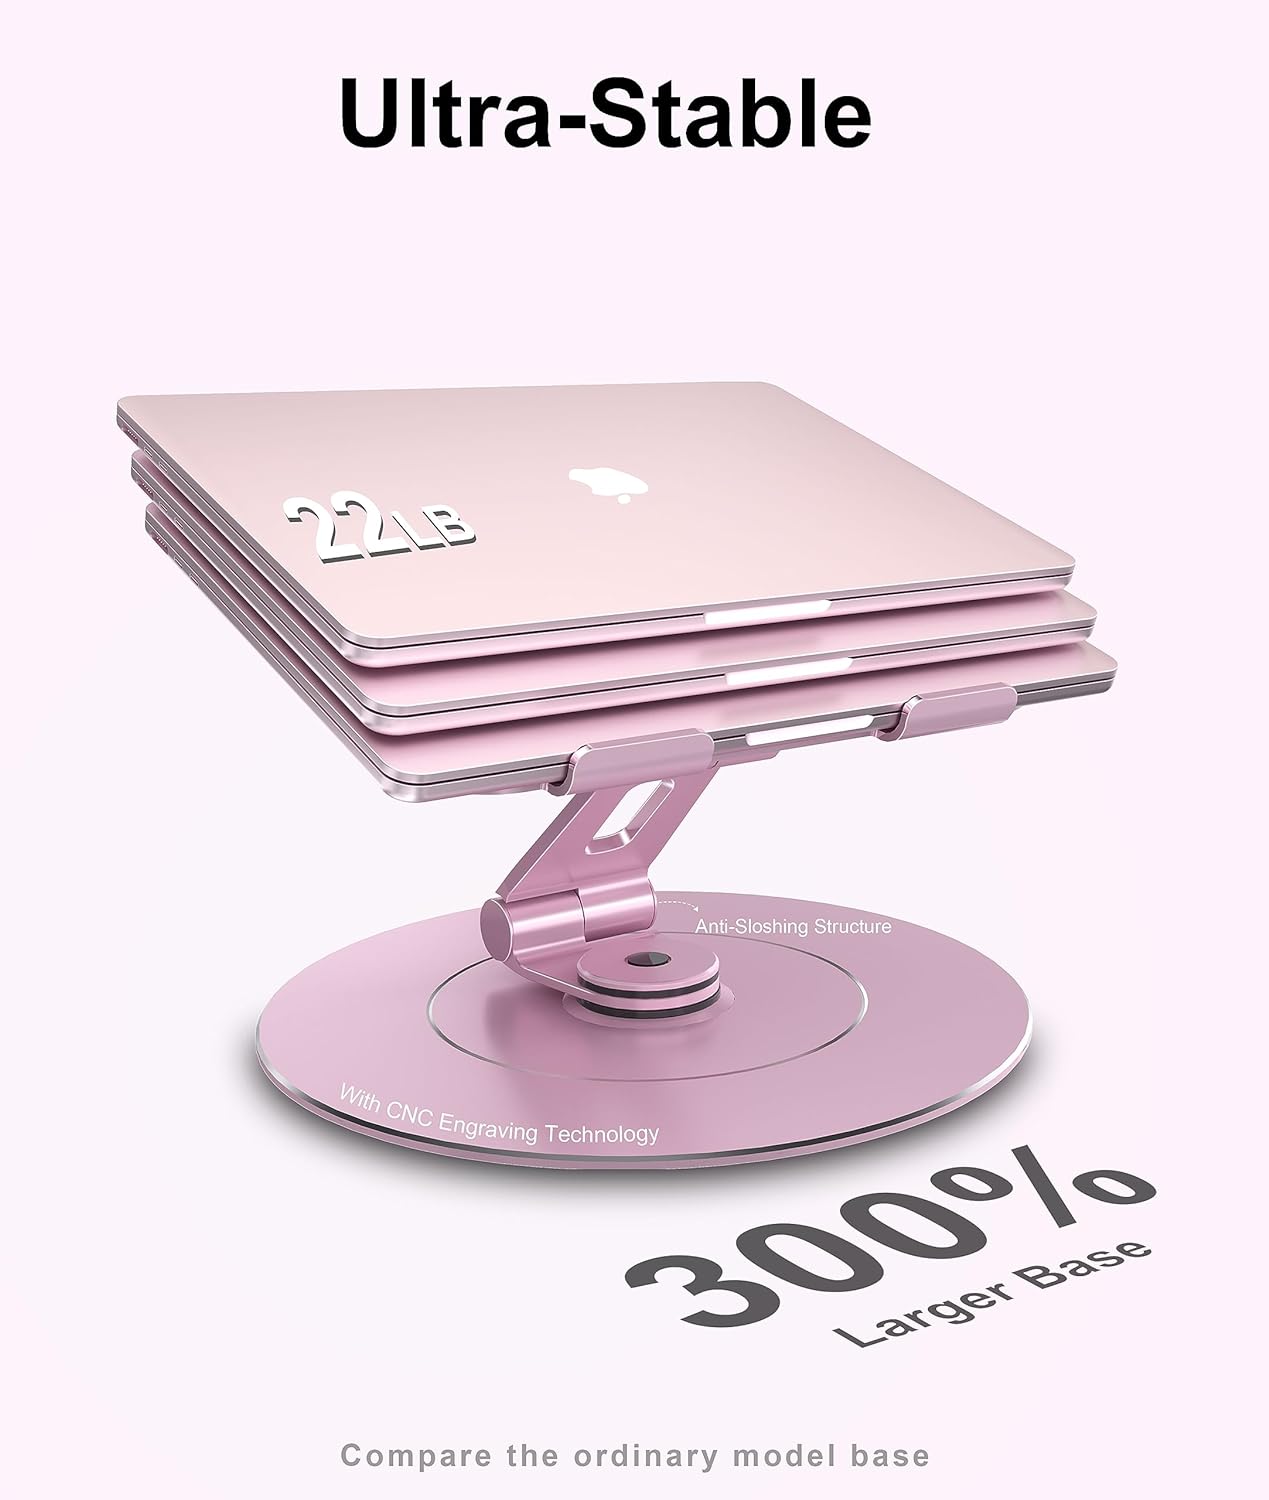 LOXP Ultra-Stable Swivel Laptop Stand for Desk, 300% Larger Base Stability, Military-Grade Aluminum, Anti-Loosening Structure, Height Adjustable Laptop Stand, Suitable for 10"-17.3",Pink